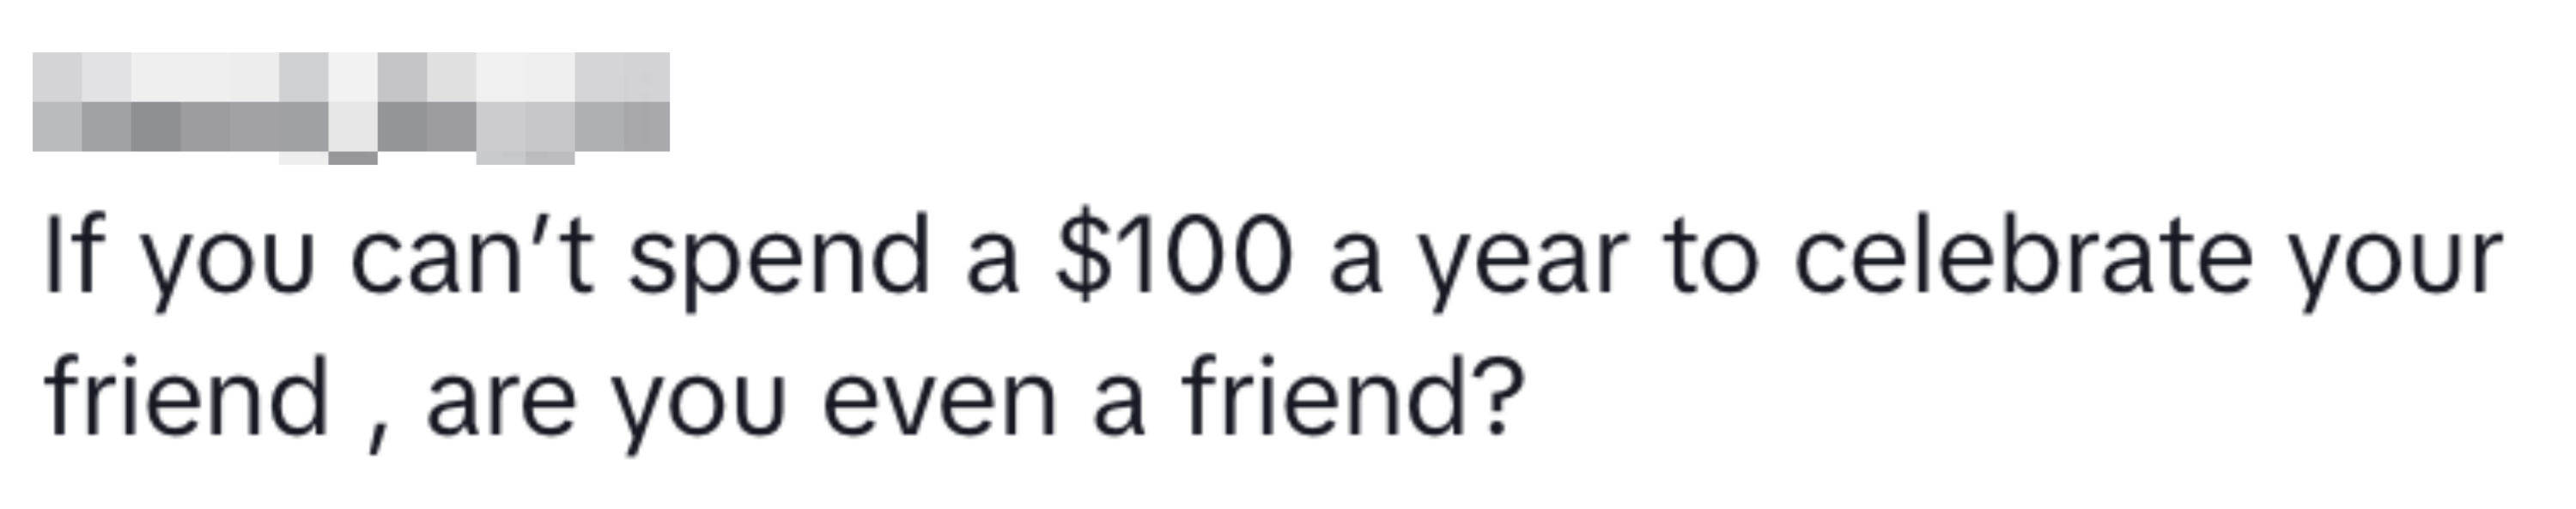 &quot;If you can&#x27;t spend $100 a year to celebrate your friend, are you even a friend?&quot;